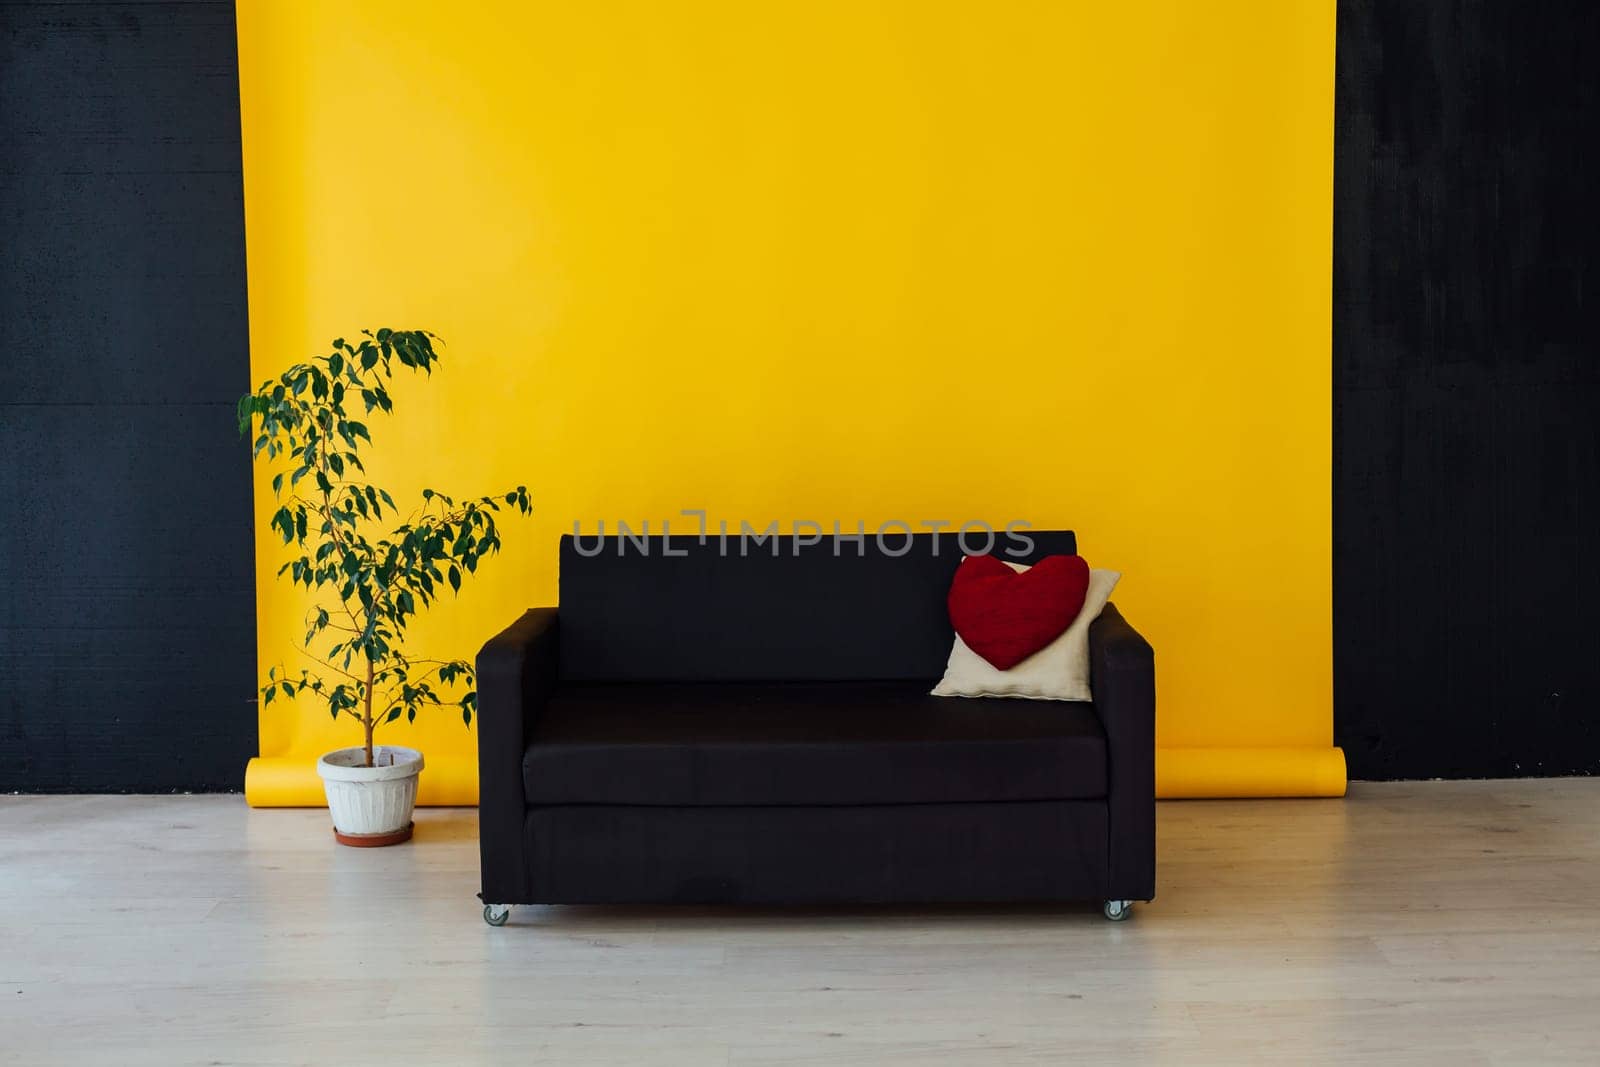 black sofa with pillows in the interior of the yellow room by Simakov